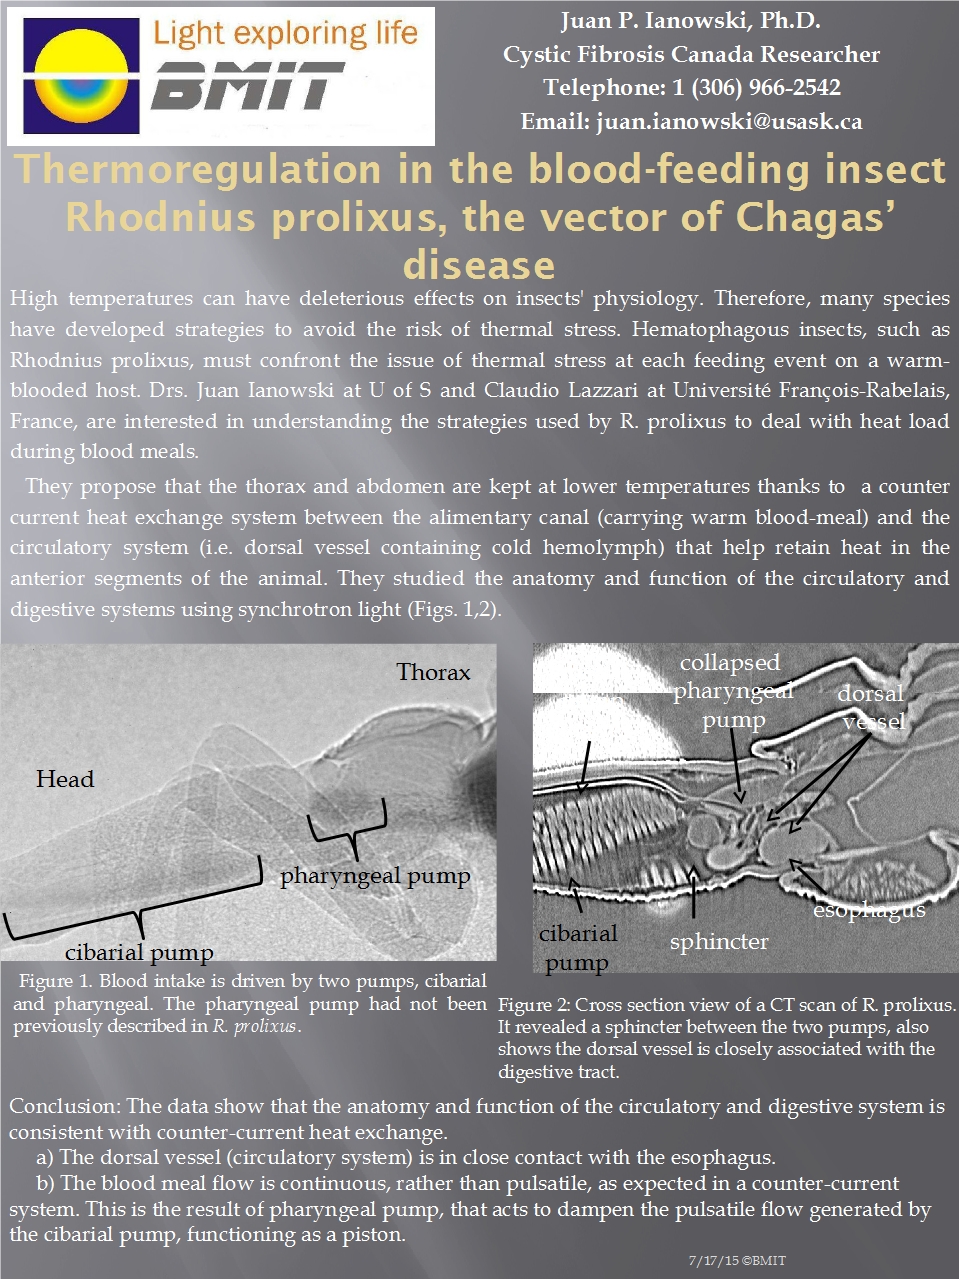 Thermoregulation in the Blood-Feeding Insect Rhodnius Prolixus, the Vector of Chagas’ disease Image